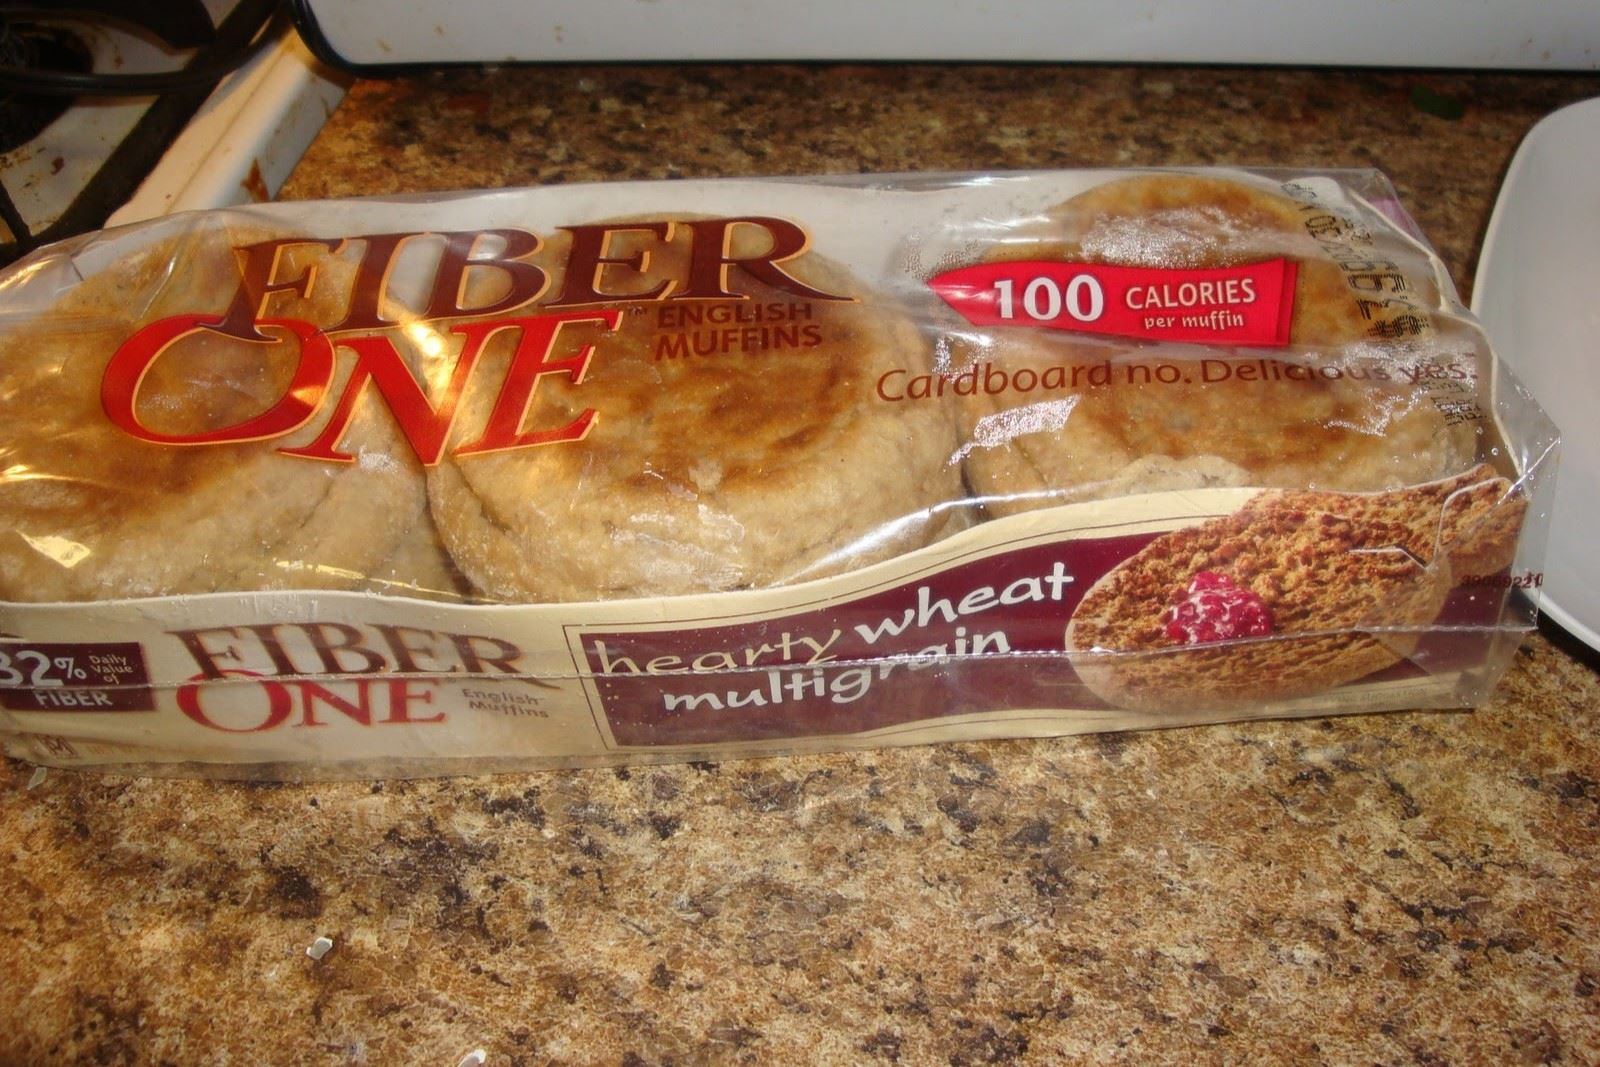 18-fiber-one-english-muffins-nutrition-facts